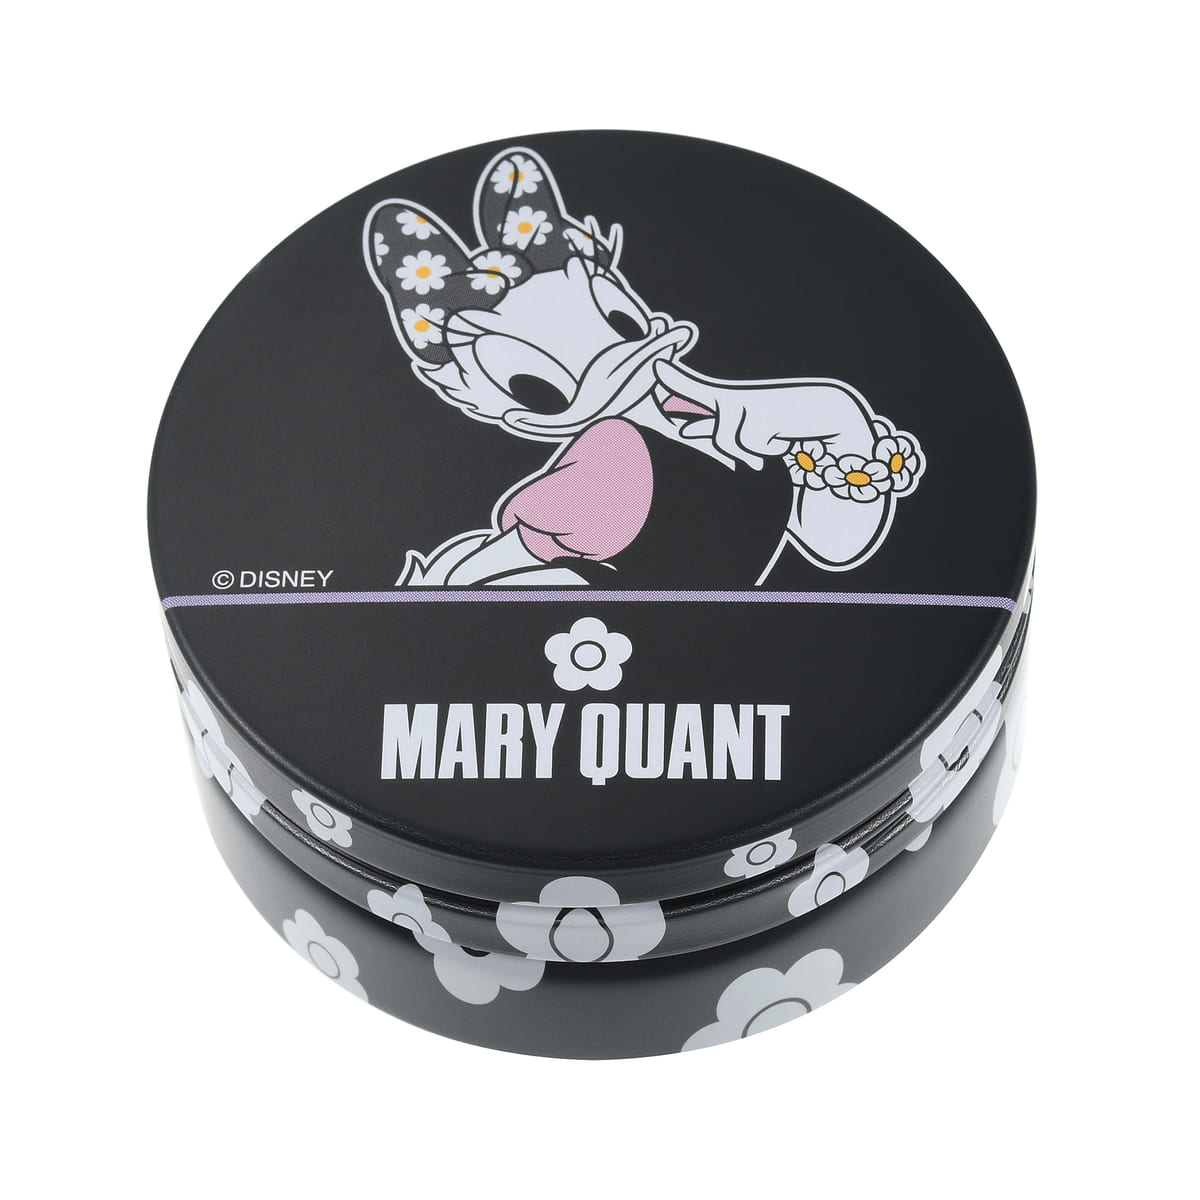 MARY QUANT】デイジー リュックサック・バックパック DAISY DUCK 